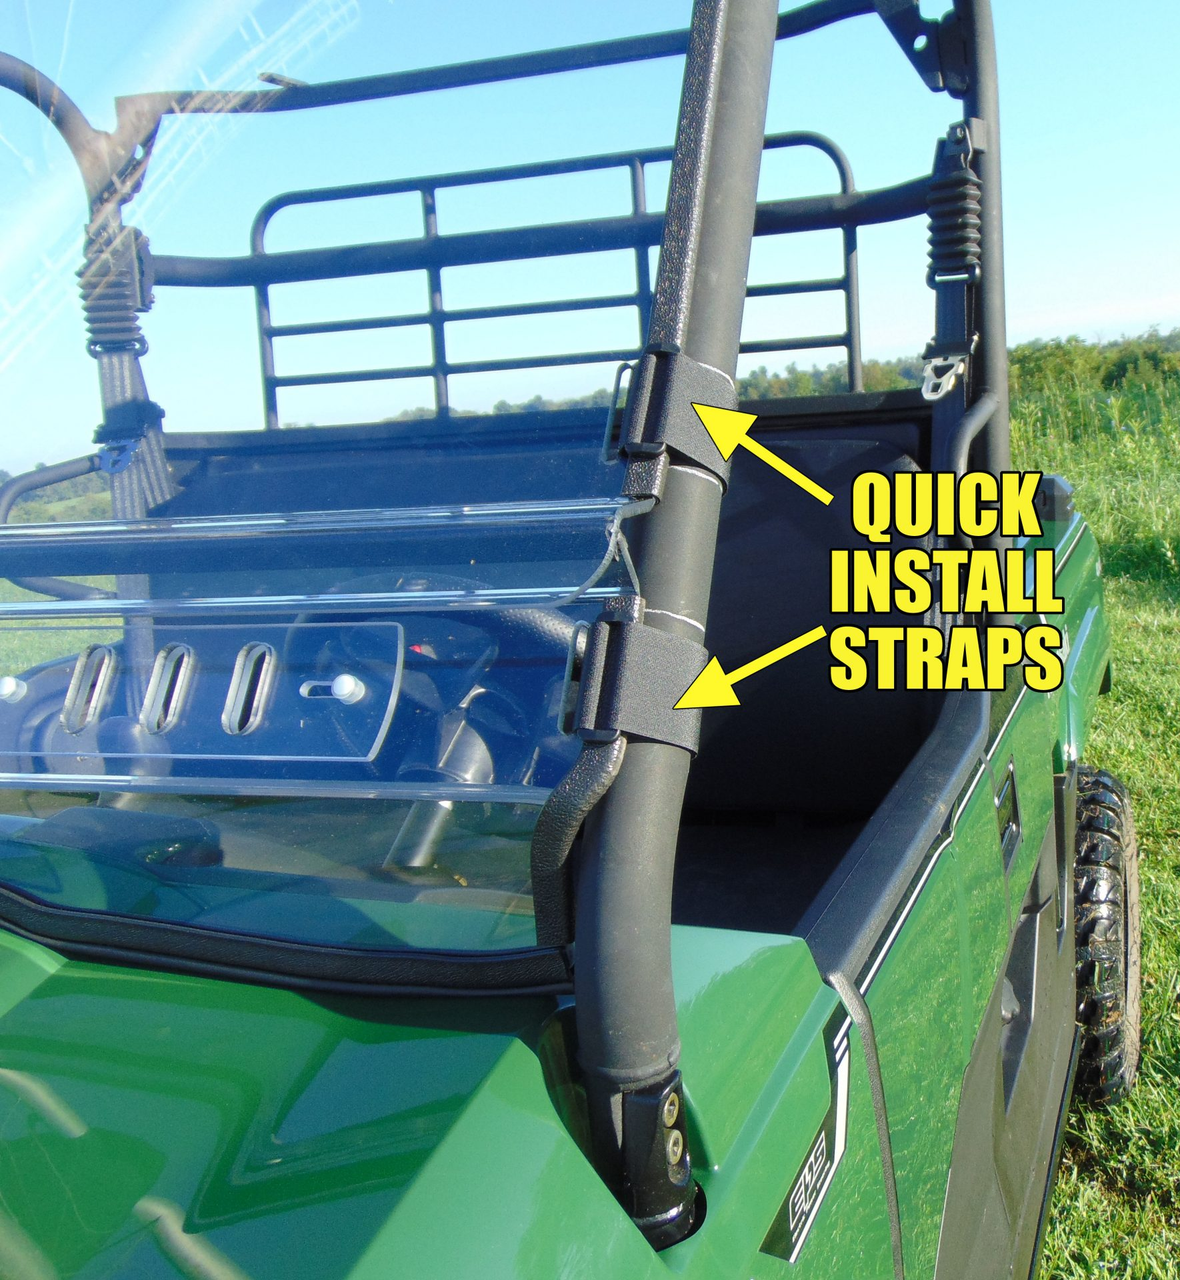 3 Star side x side can-am maverick x3 windshield quick install straps